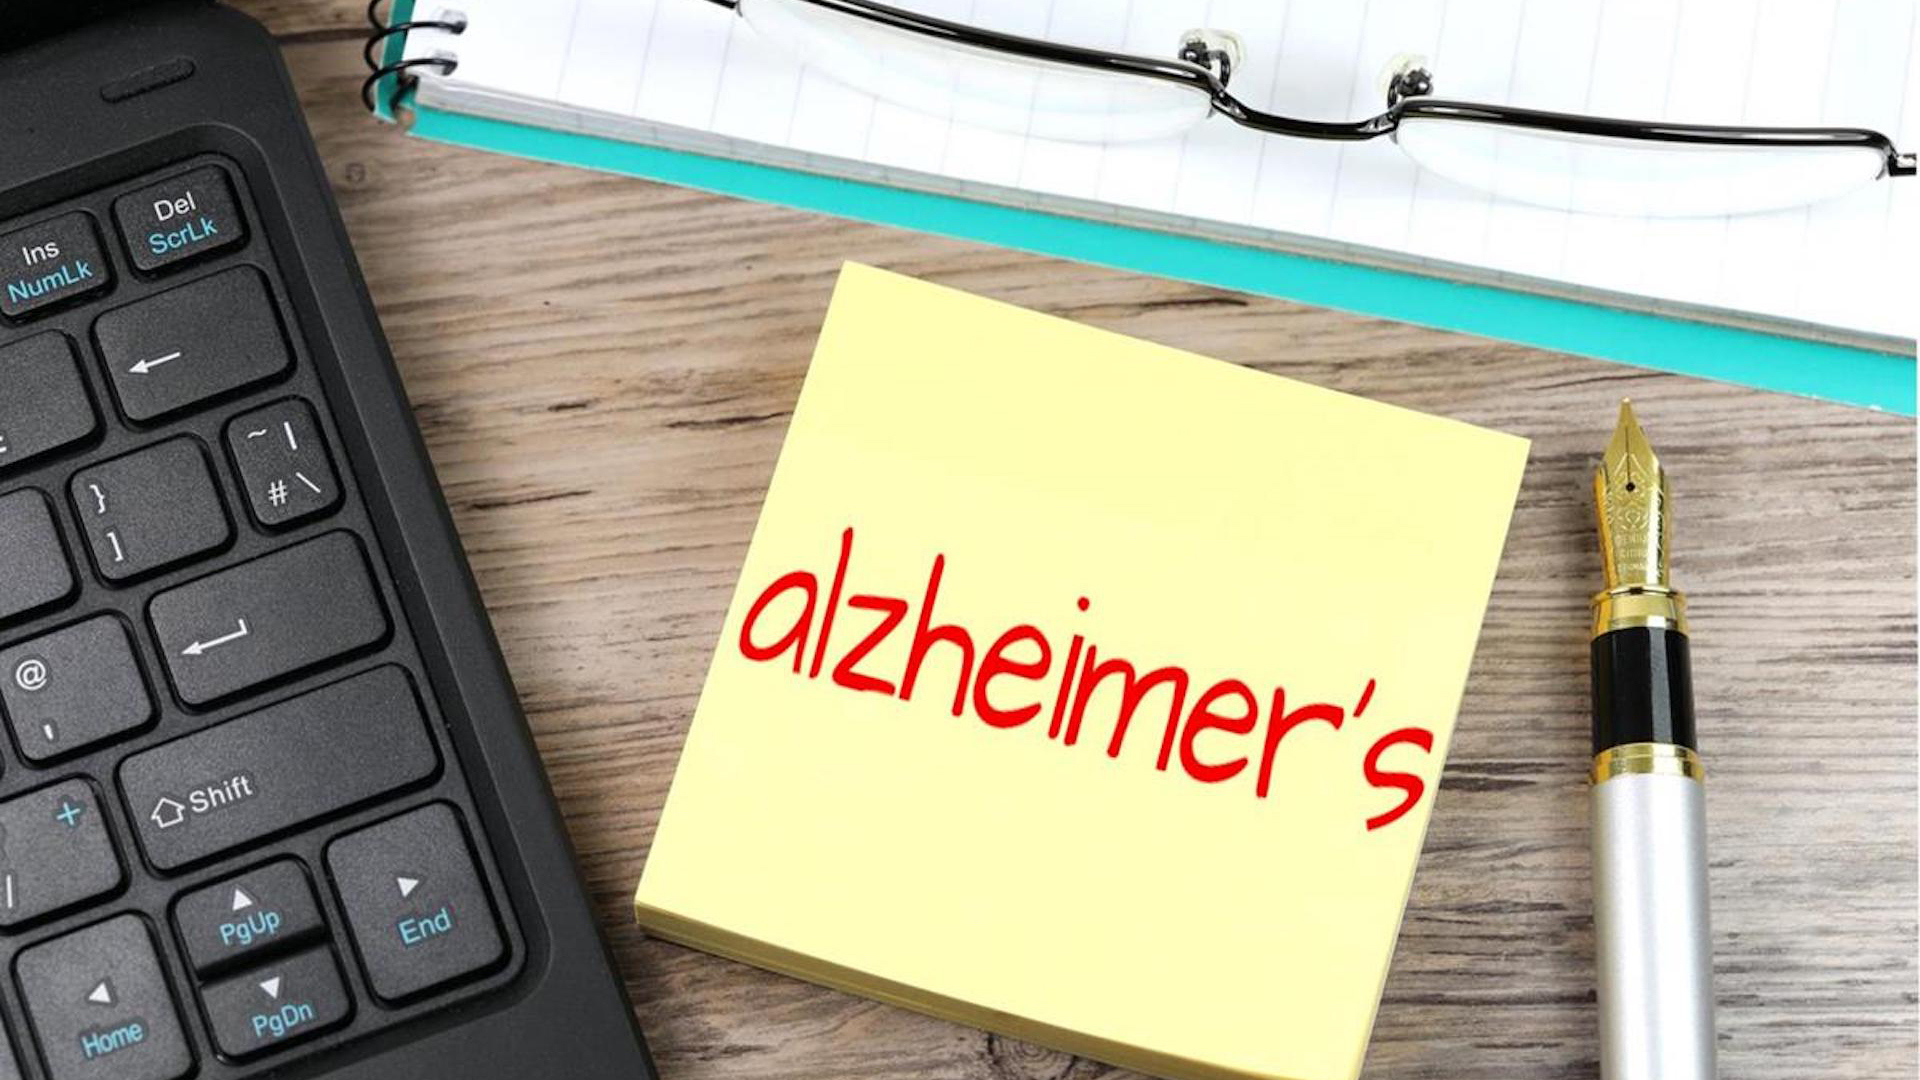 Post-it notes are listed as one strategy for Alzheimer caregivers.